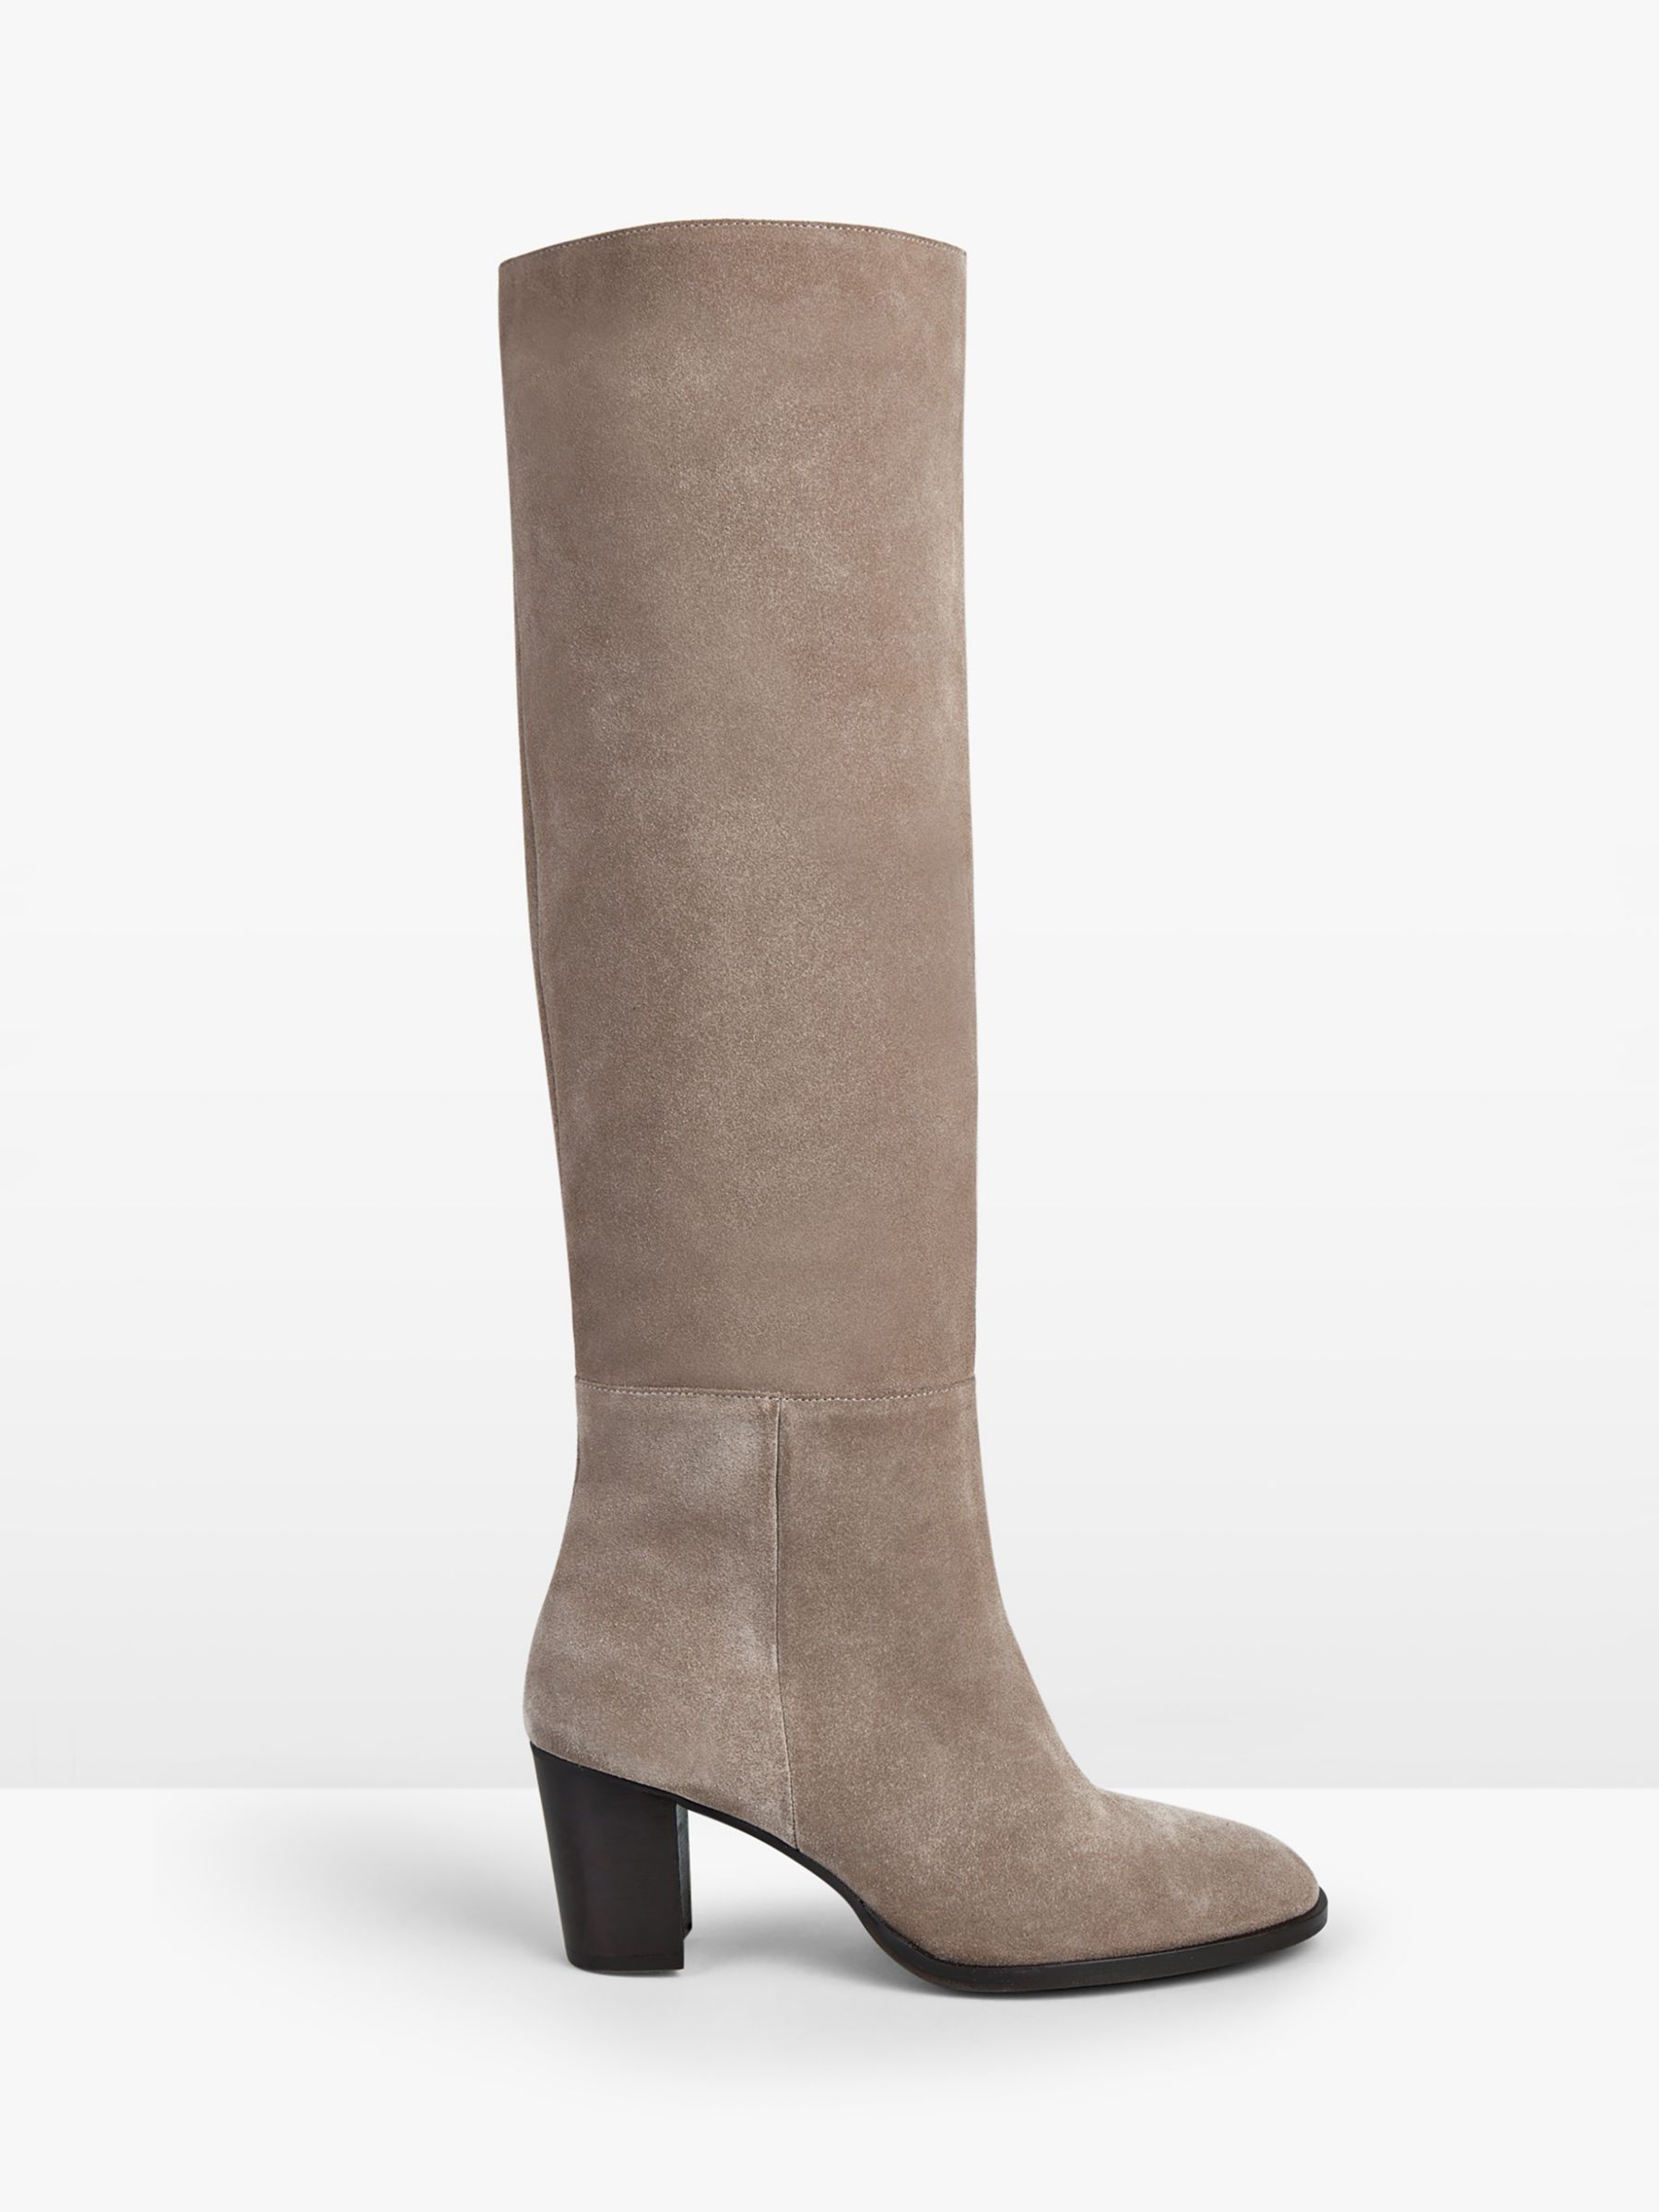 HUSH Draper Suede Long Boots, Taupe